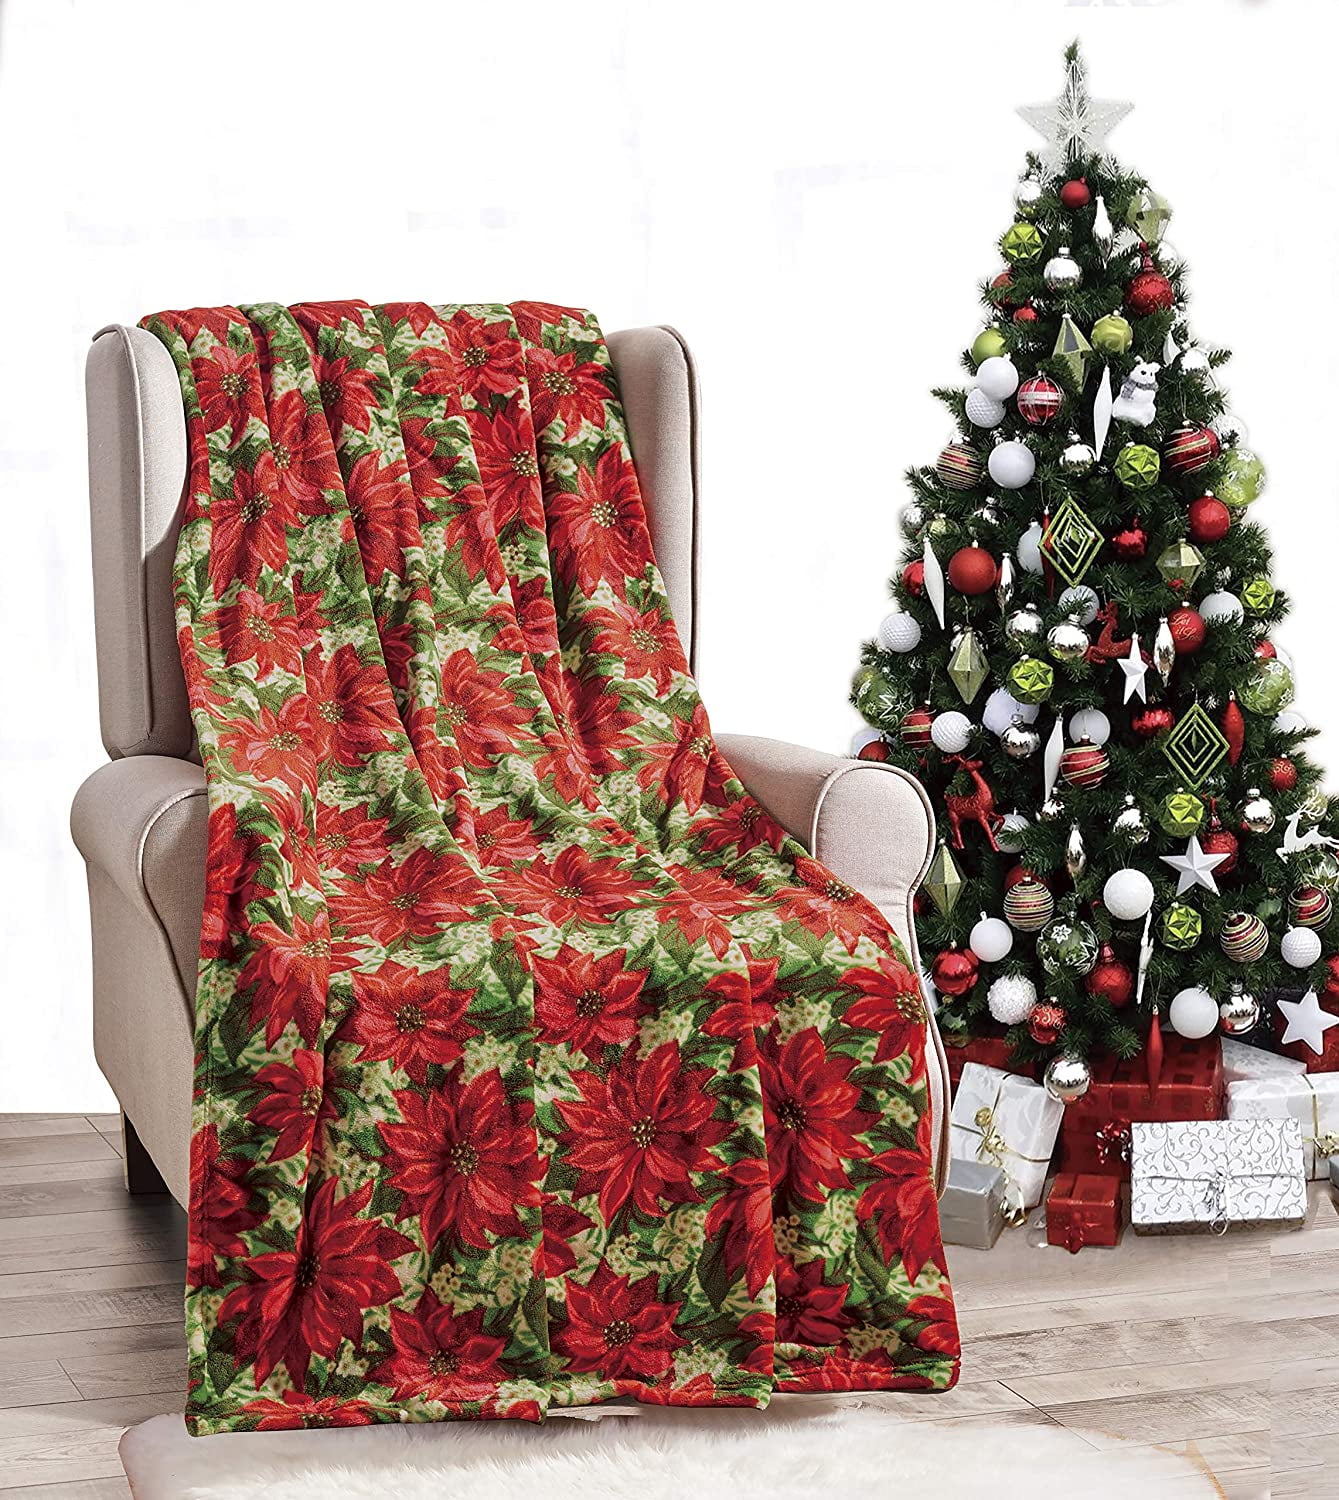 Christmas Throw Blanket Home Decor,Retro Santa Claus Xmas Ornament Blanket,Super Soft Lightweight Fuzzy Velvet Fleece Warm Blankets for Couch Bed Chair Office Sofa Camping,50x60 Inch